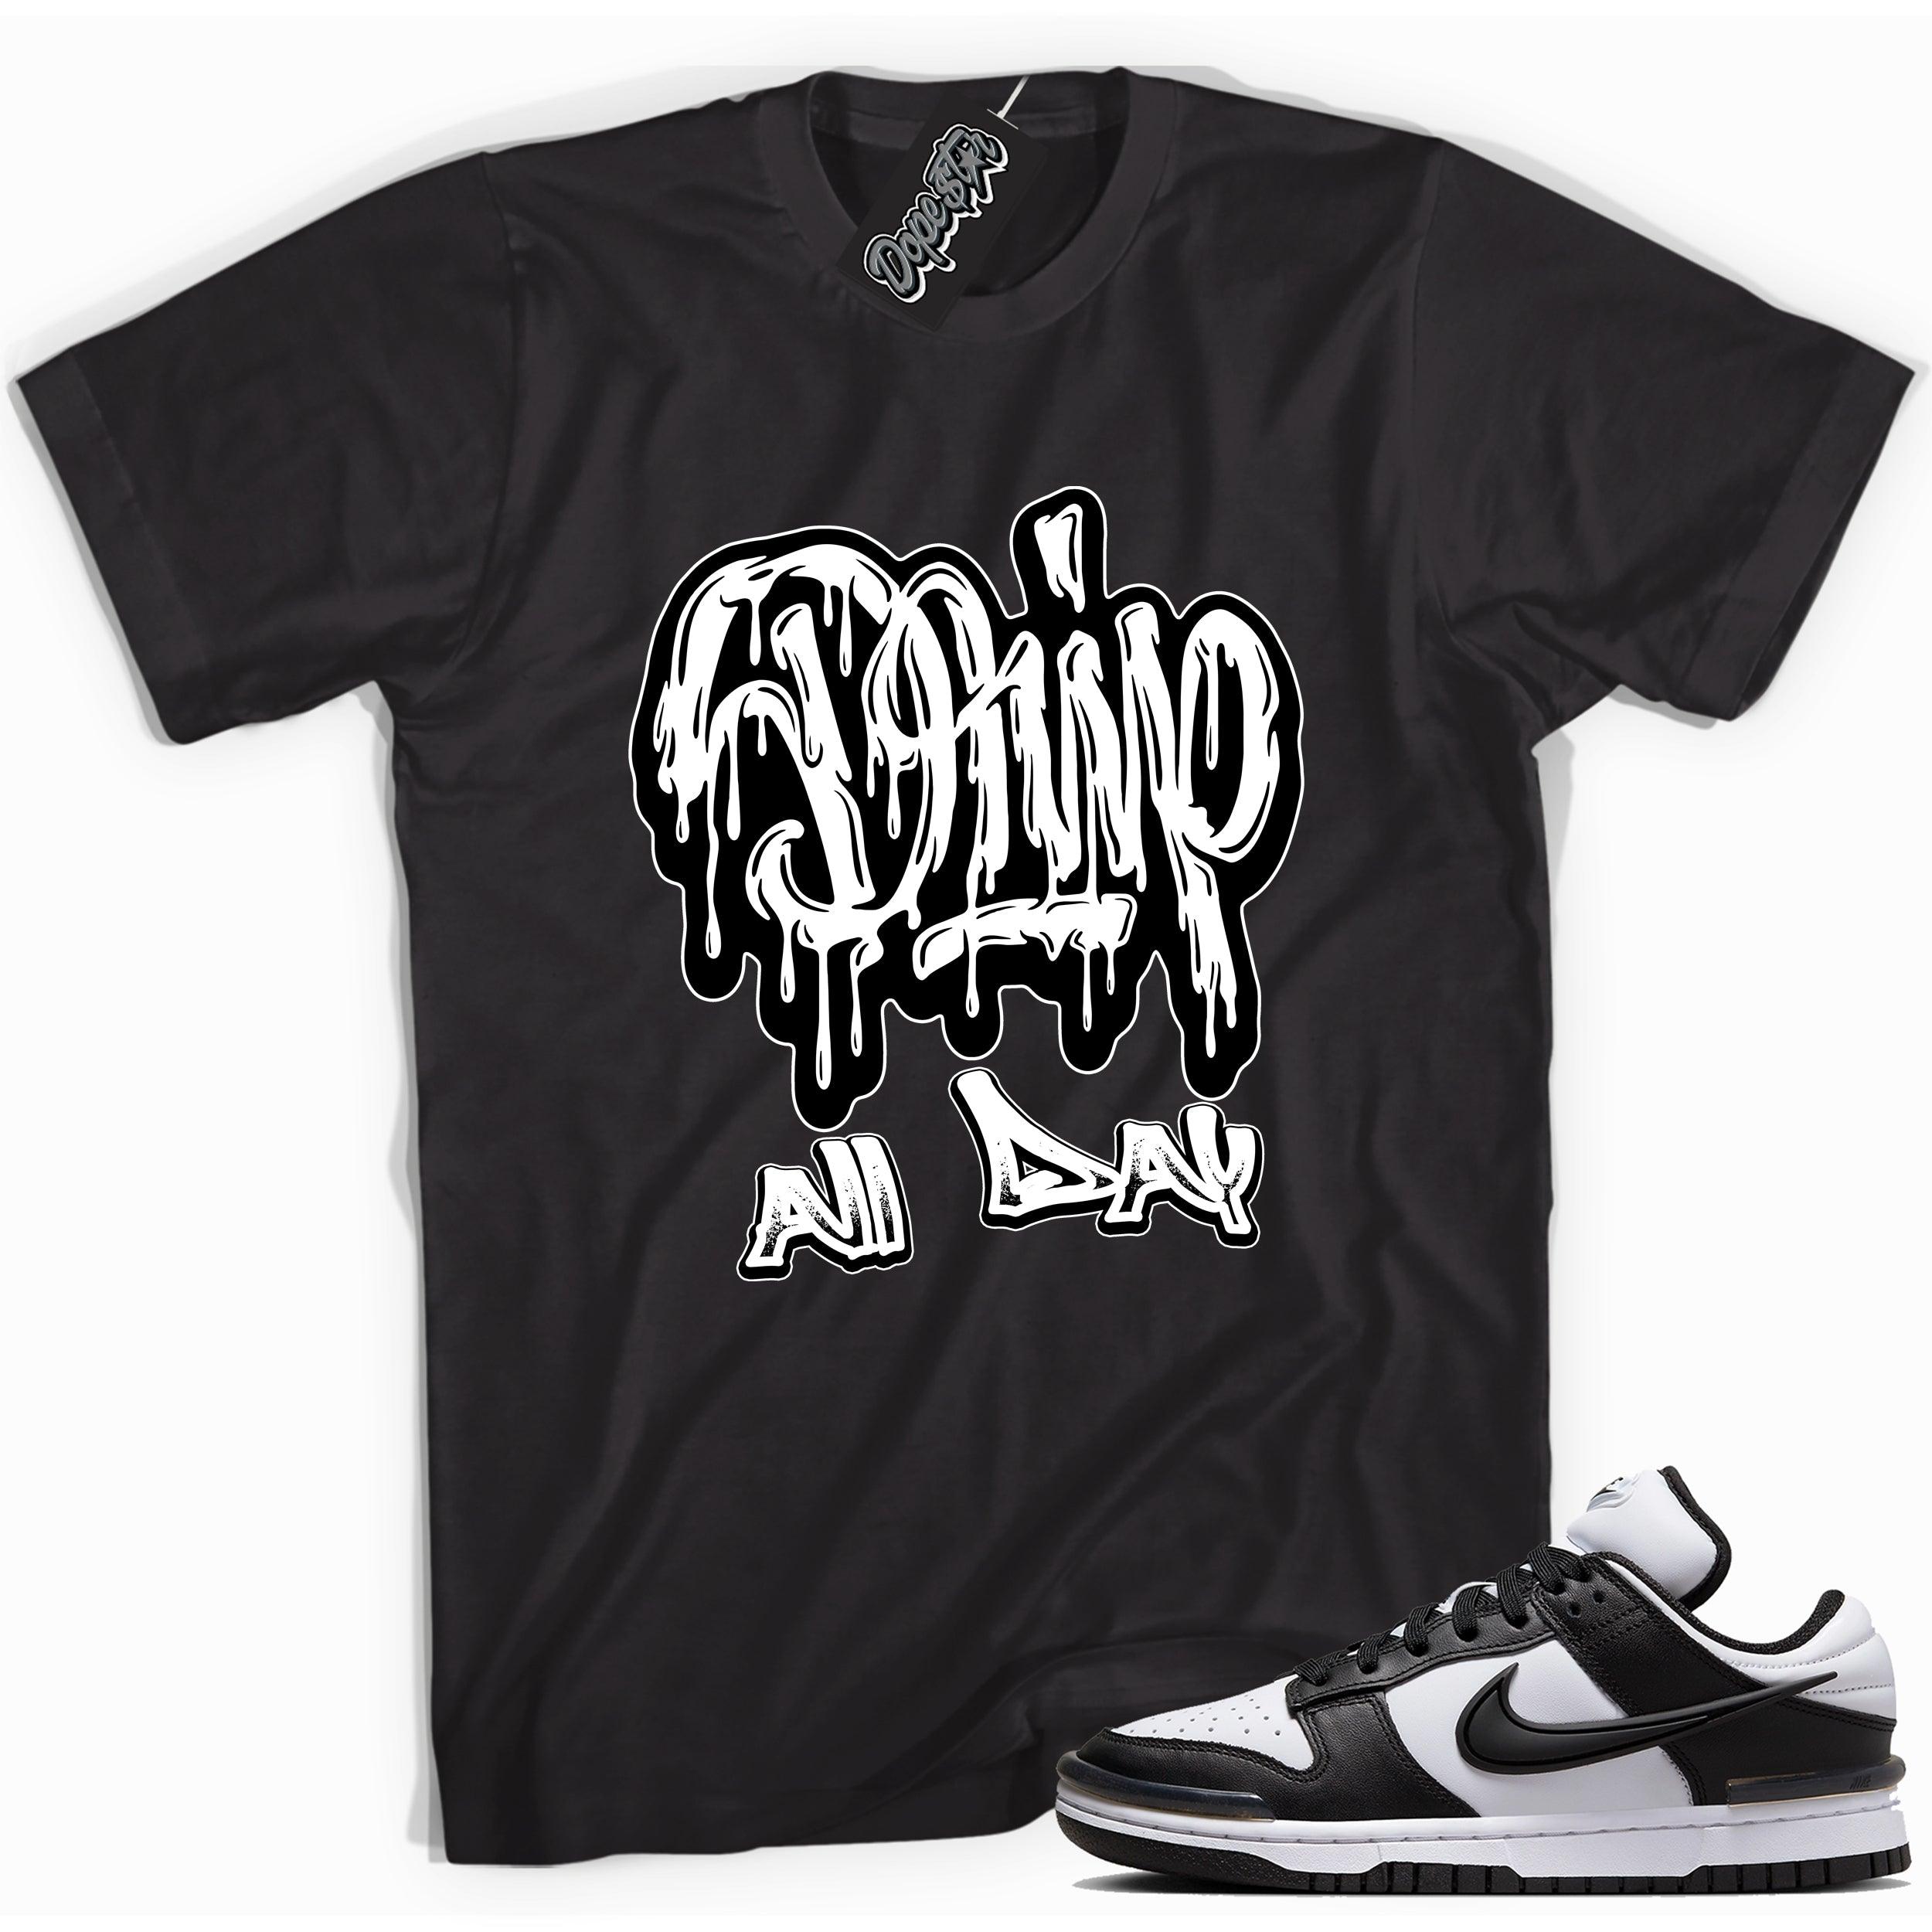 Cool black graphic tee with 'drip all day' print, that perfectly matches Nike Dunk Low Twist Panda sneakers.